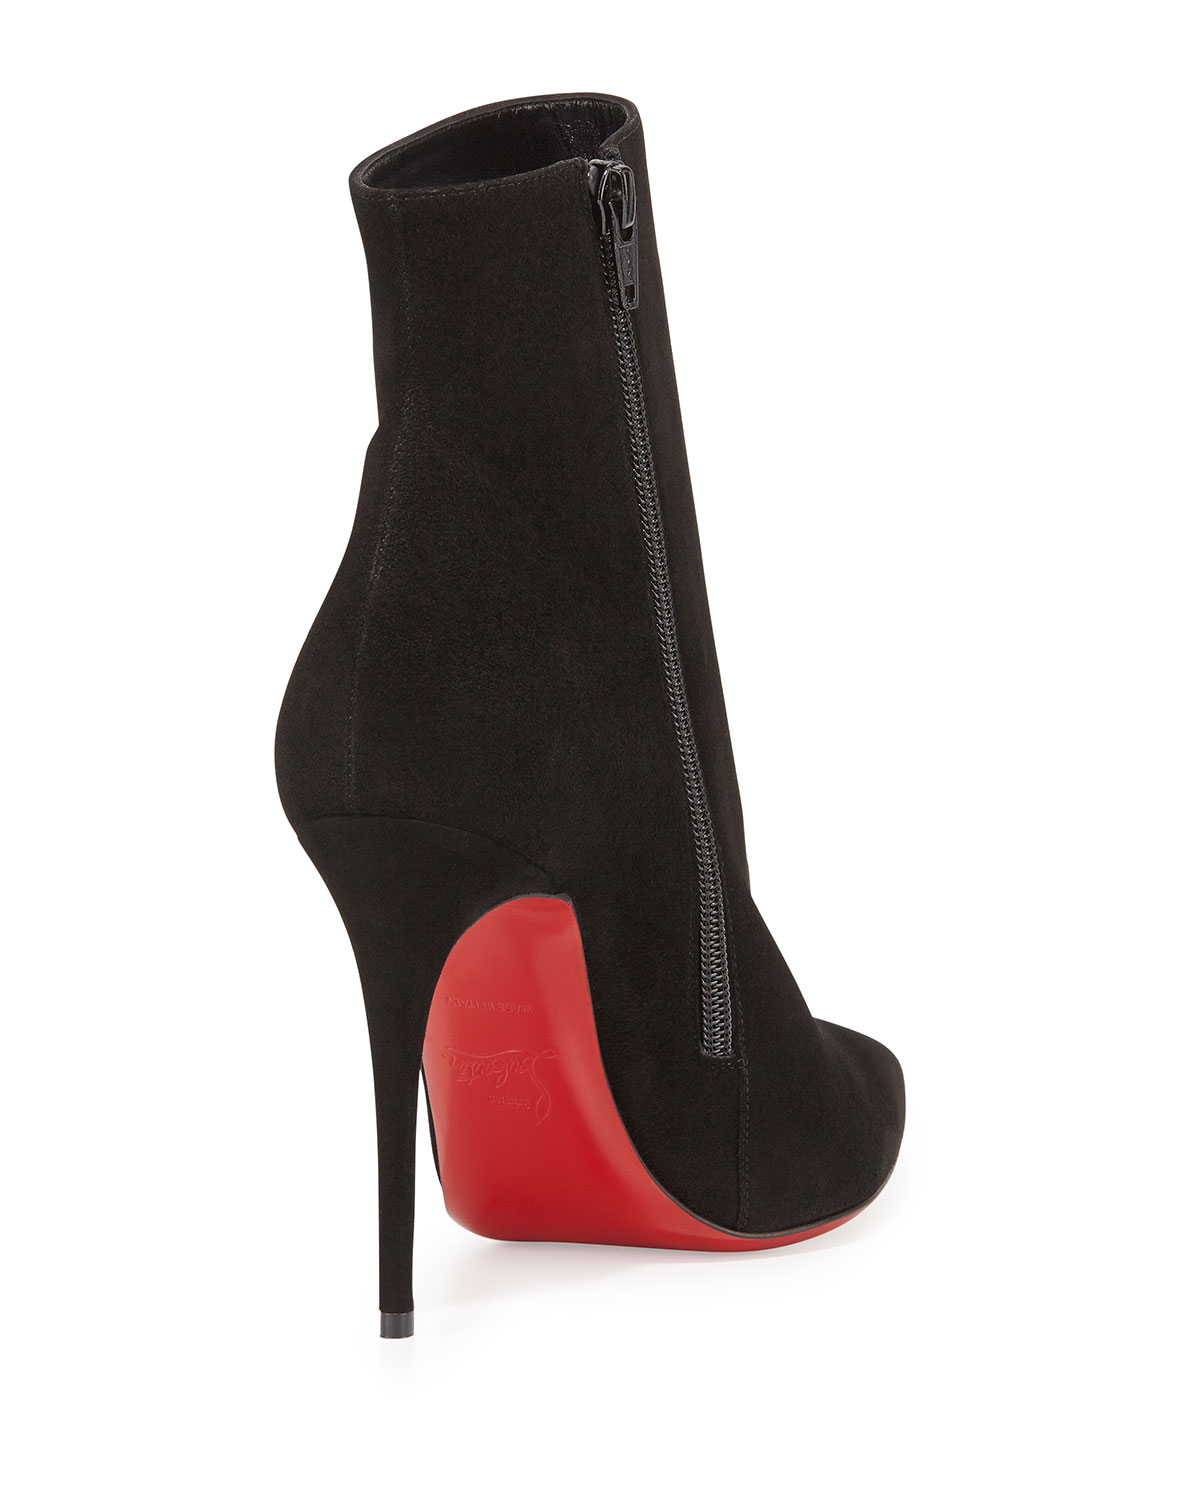 Christian louboutin So Kate Booty Suede Red Sole Ankle Boot in ...